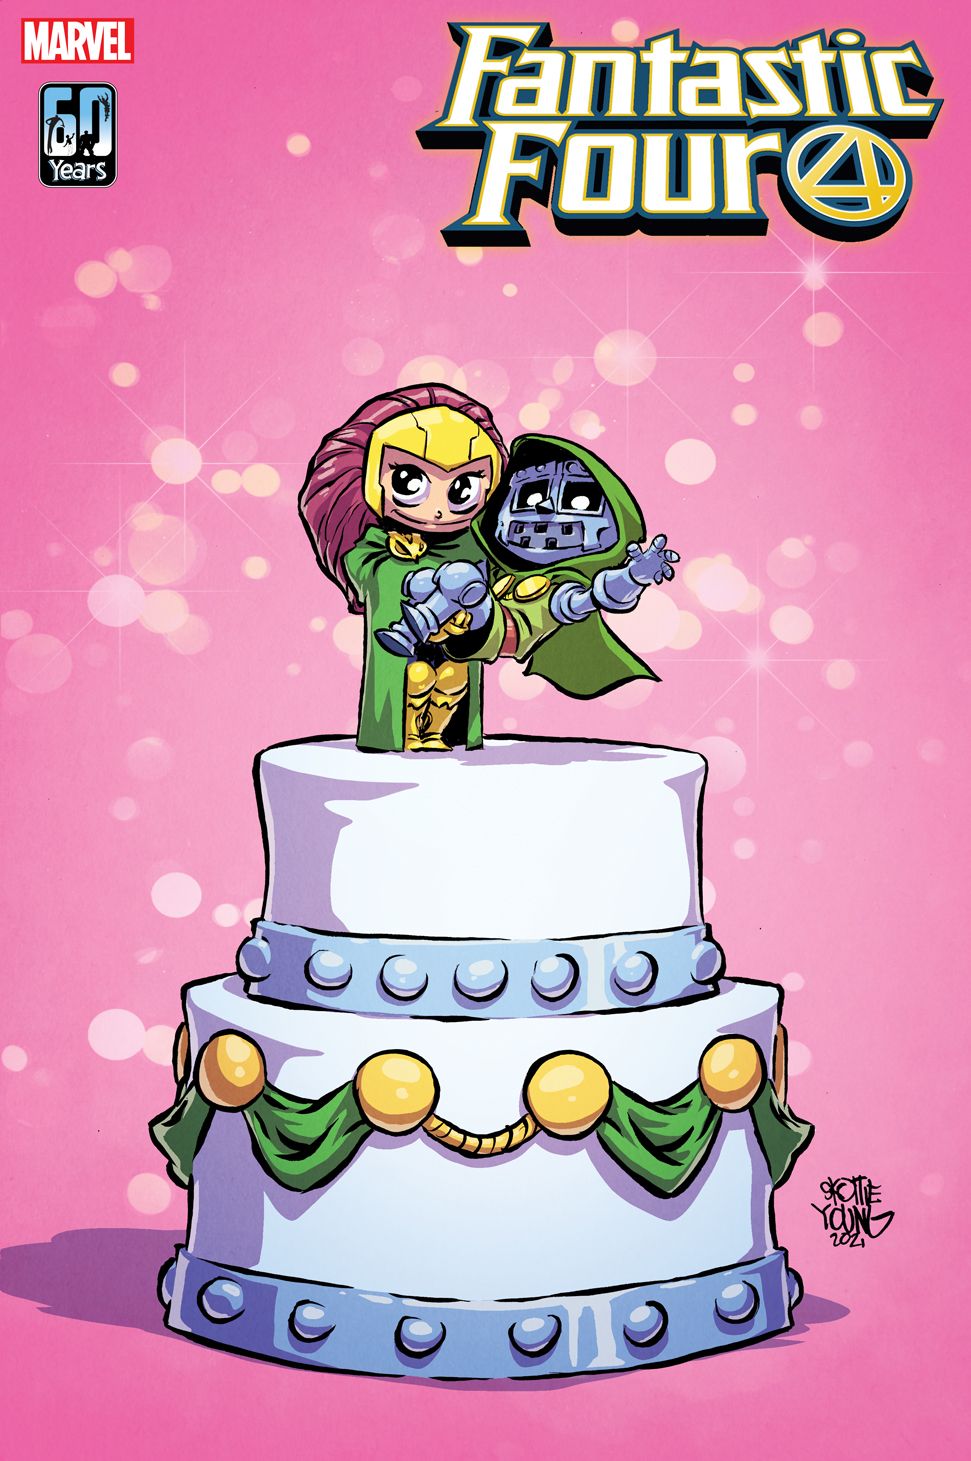 Fantastic Four #32 Variant Cover by SKOTTIE YOUNG